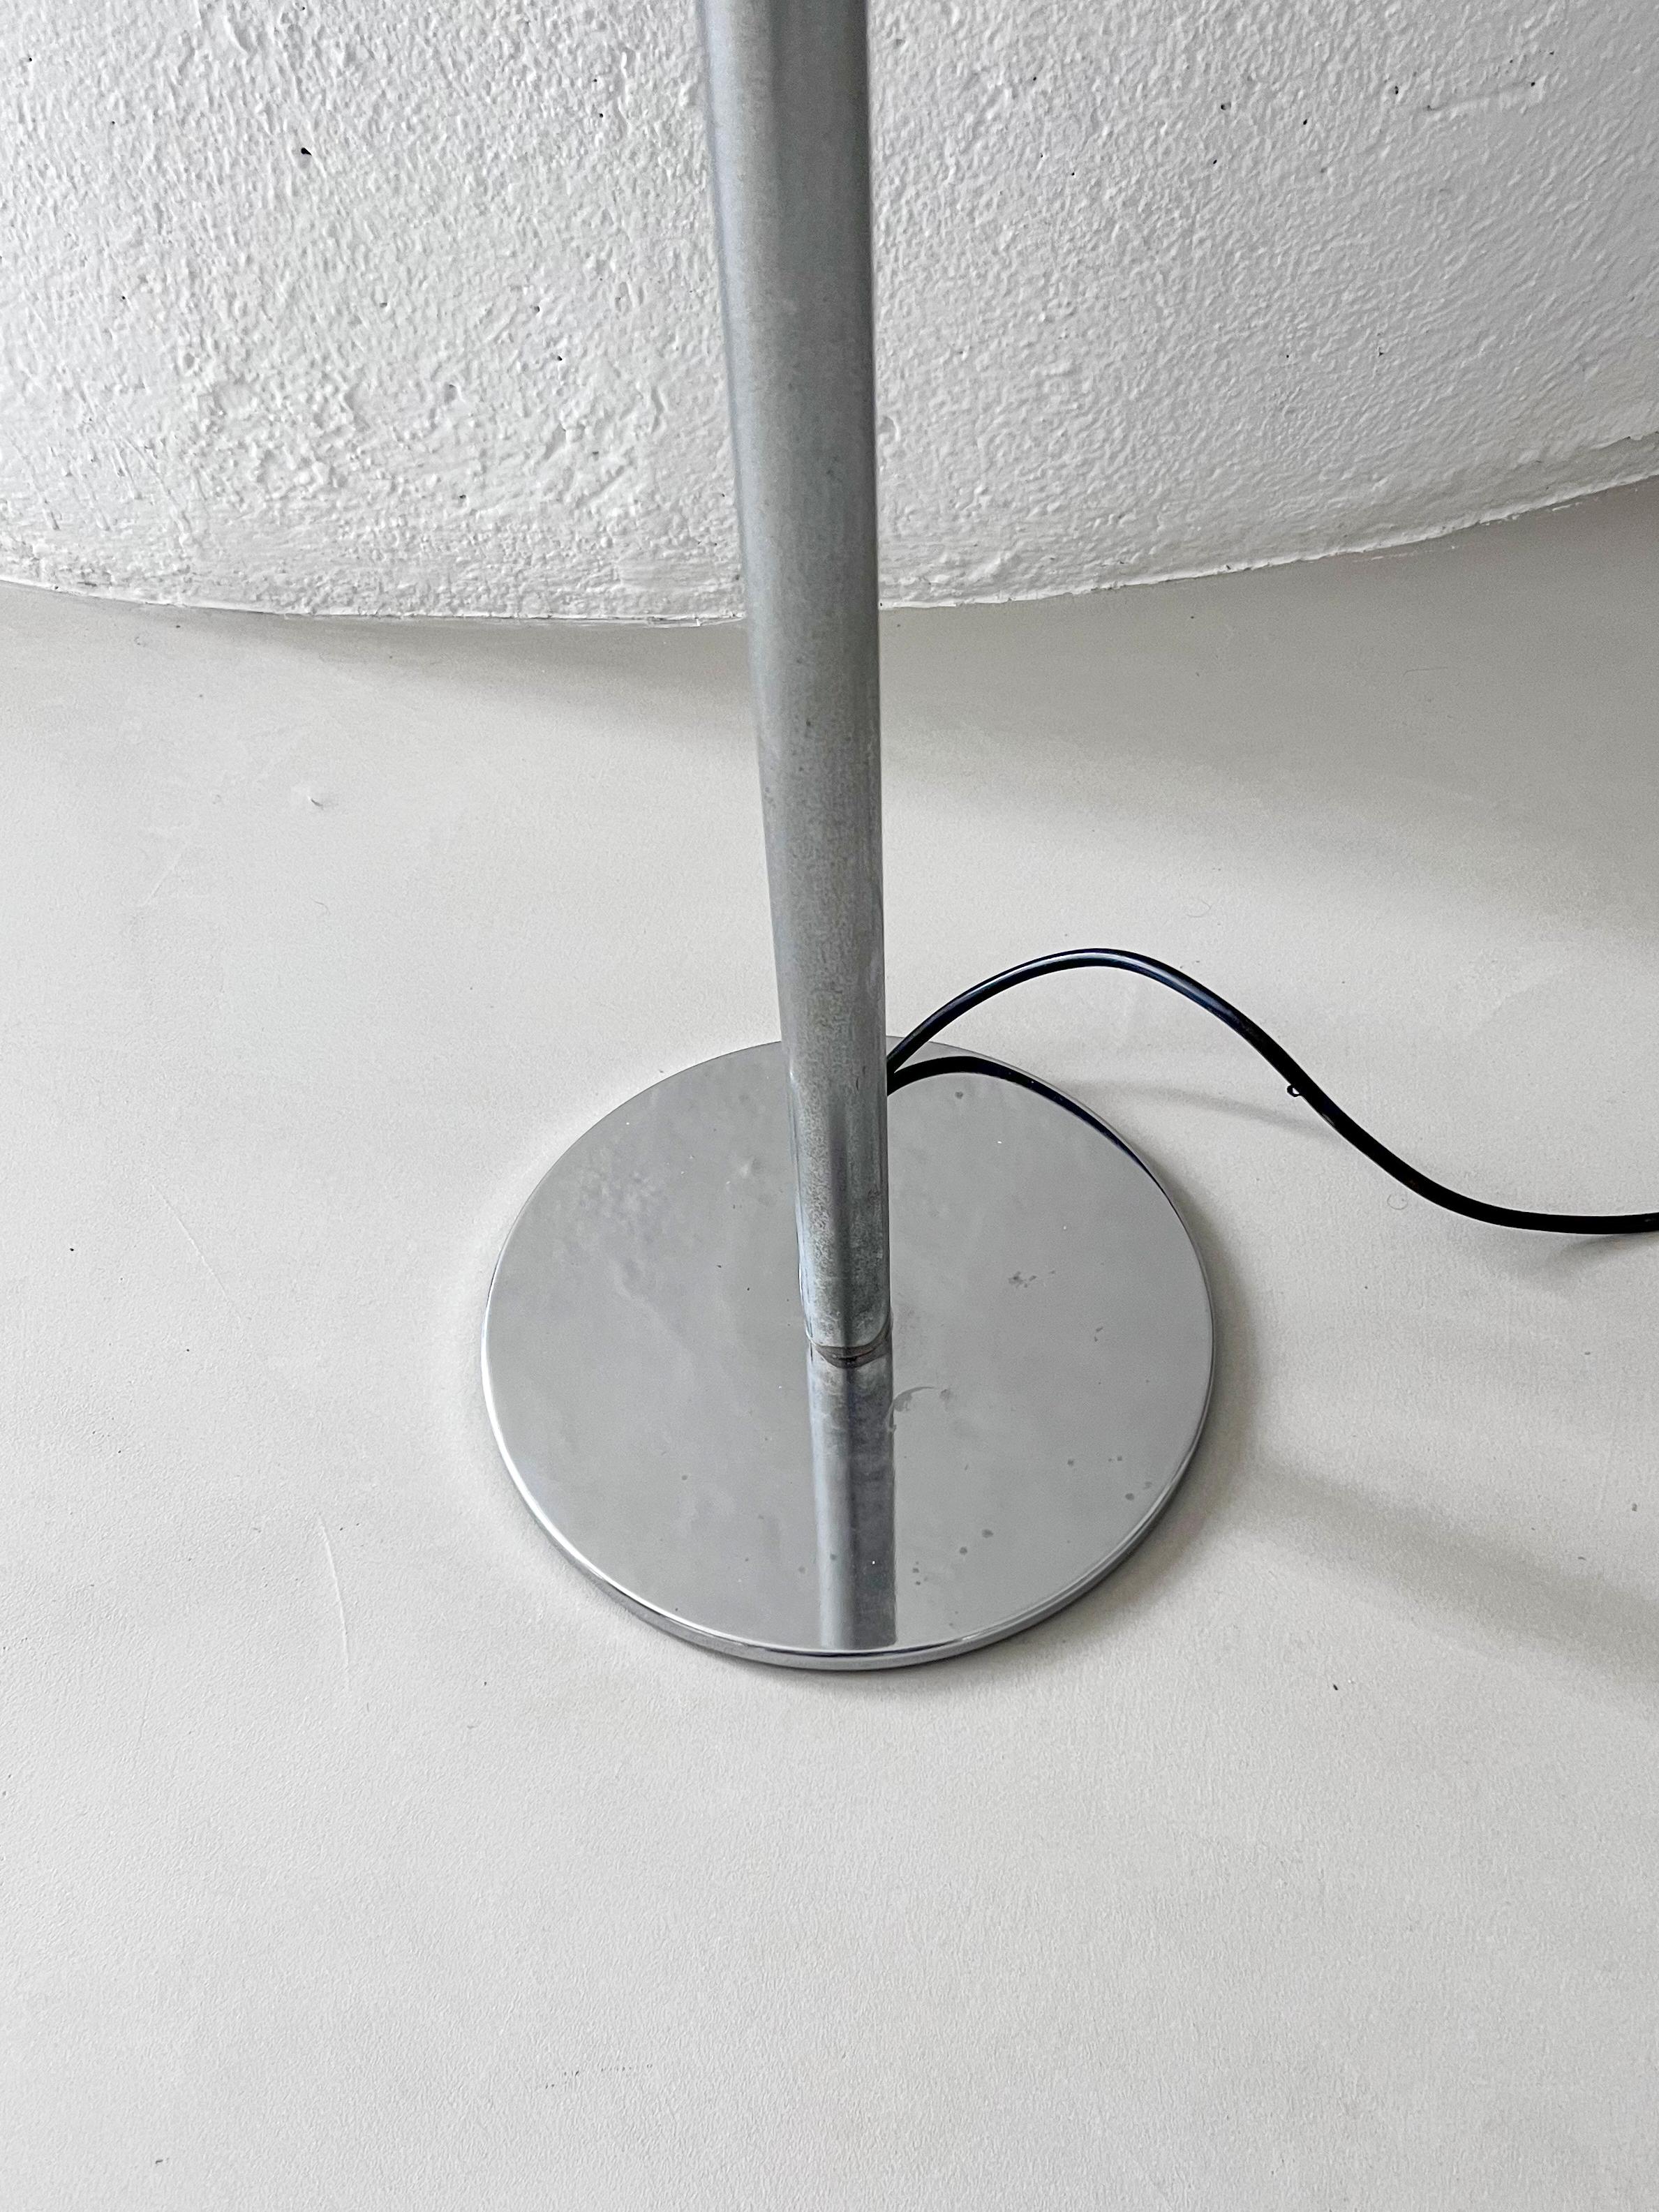 Mid-20th Century Chromed Floor Lamp from the 1960s, Made in Italy, Mid-Century Modern Era For Sale